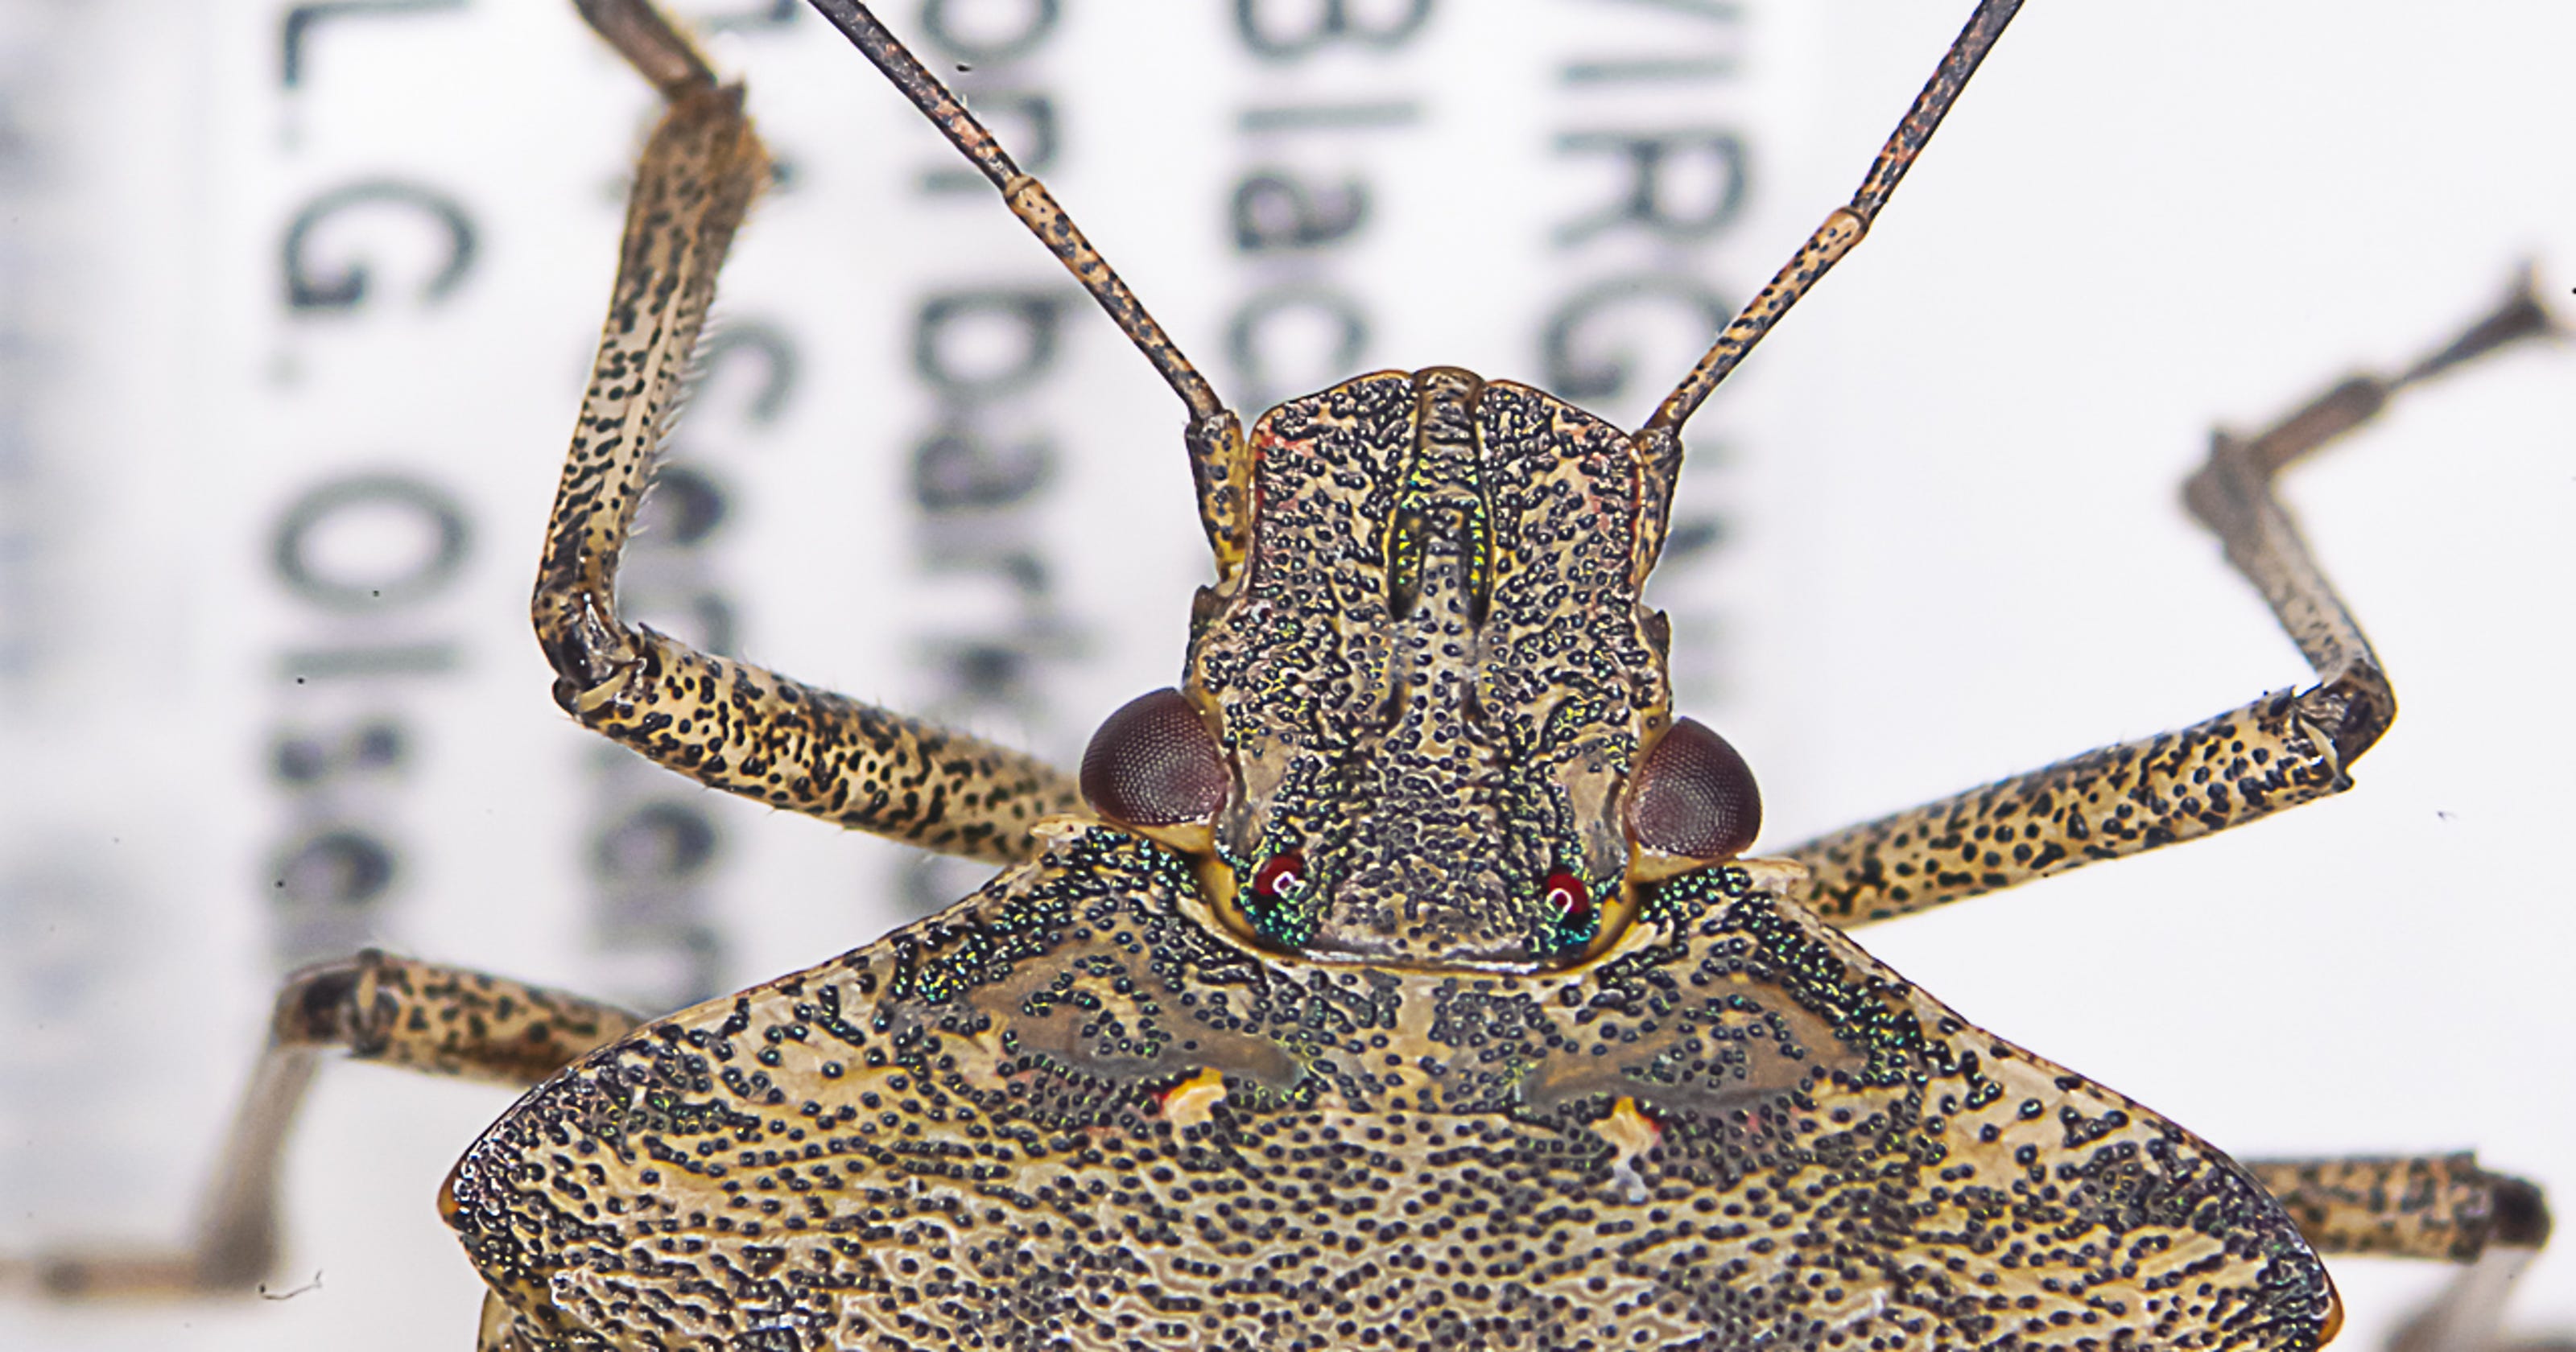 Invading stink bugs are back. Here's what to do